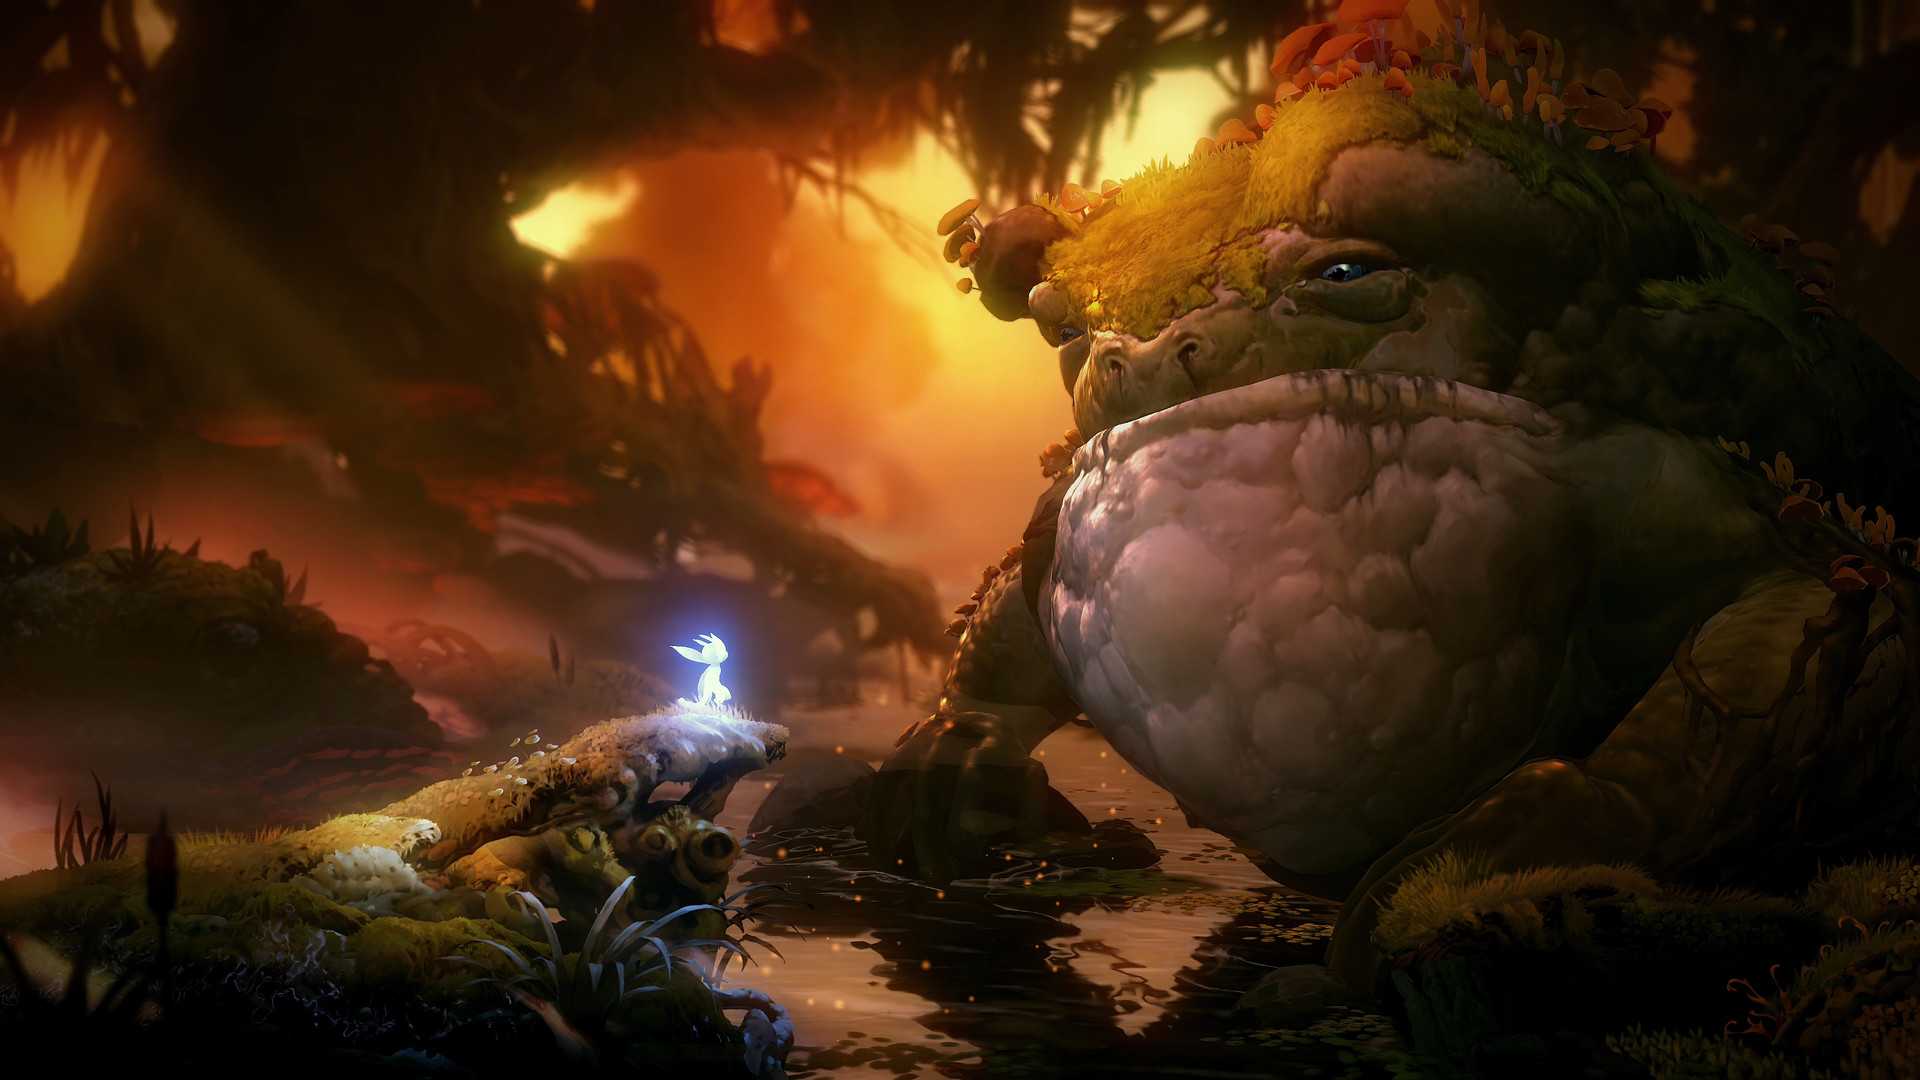 Ori and the Will of the Wisps - 6 screenshots